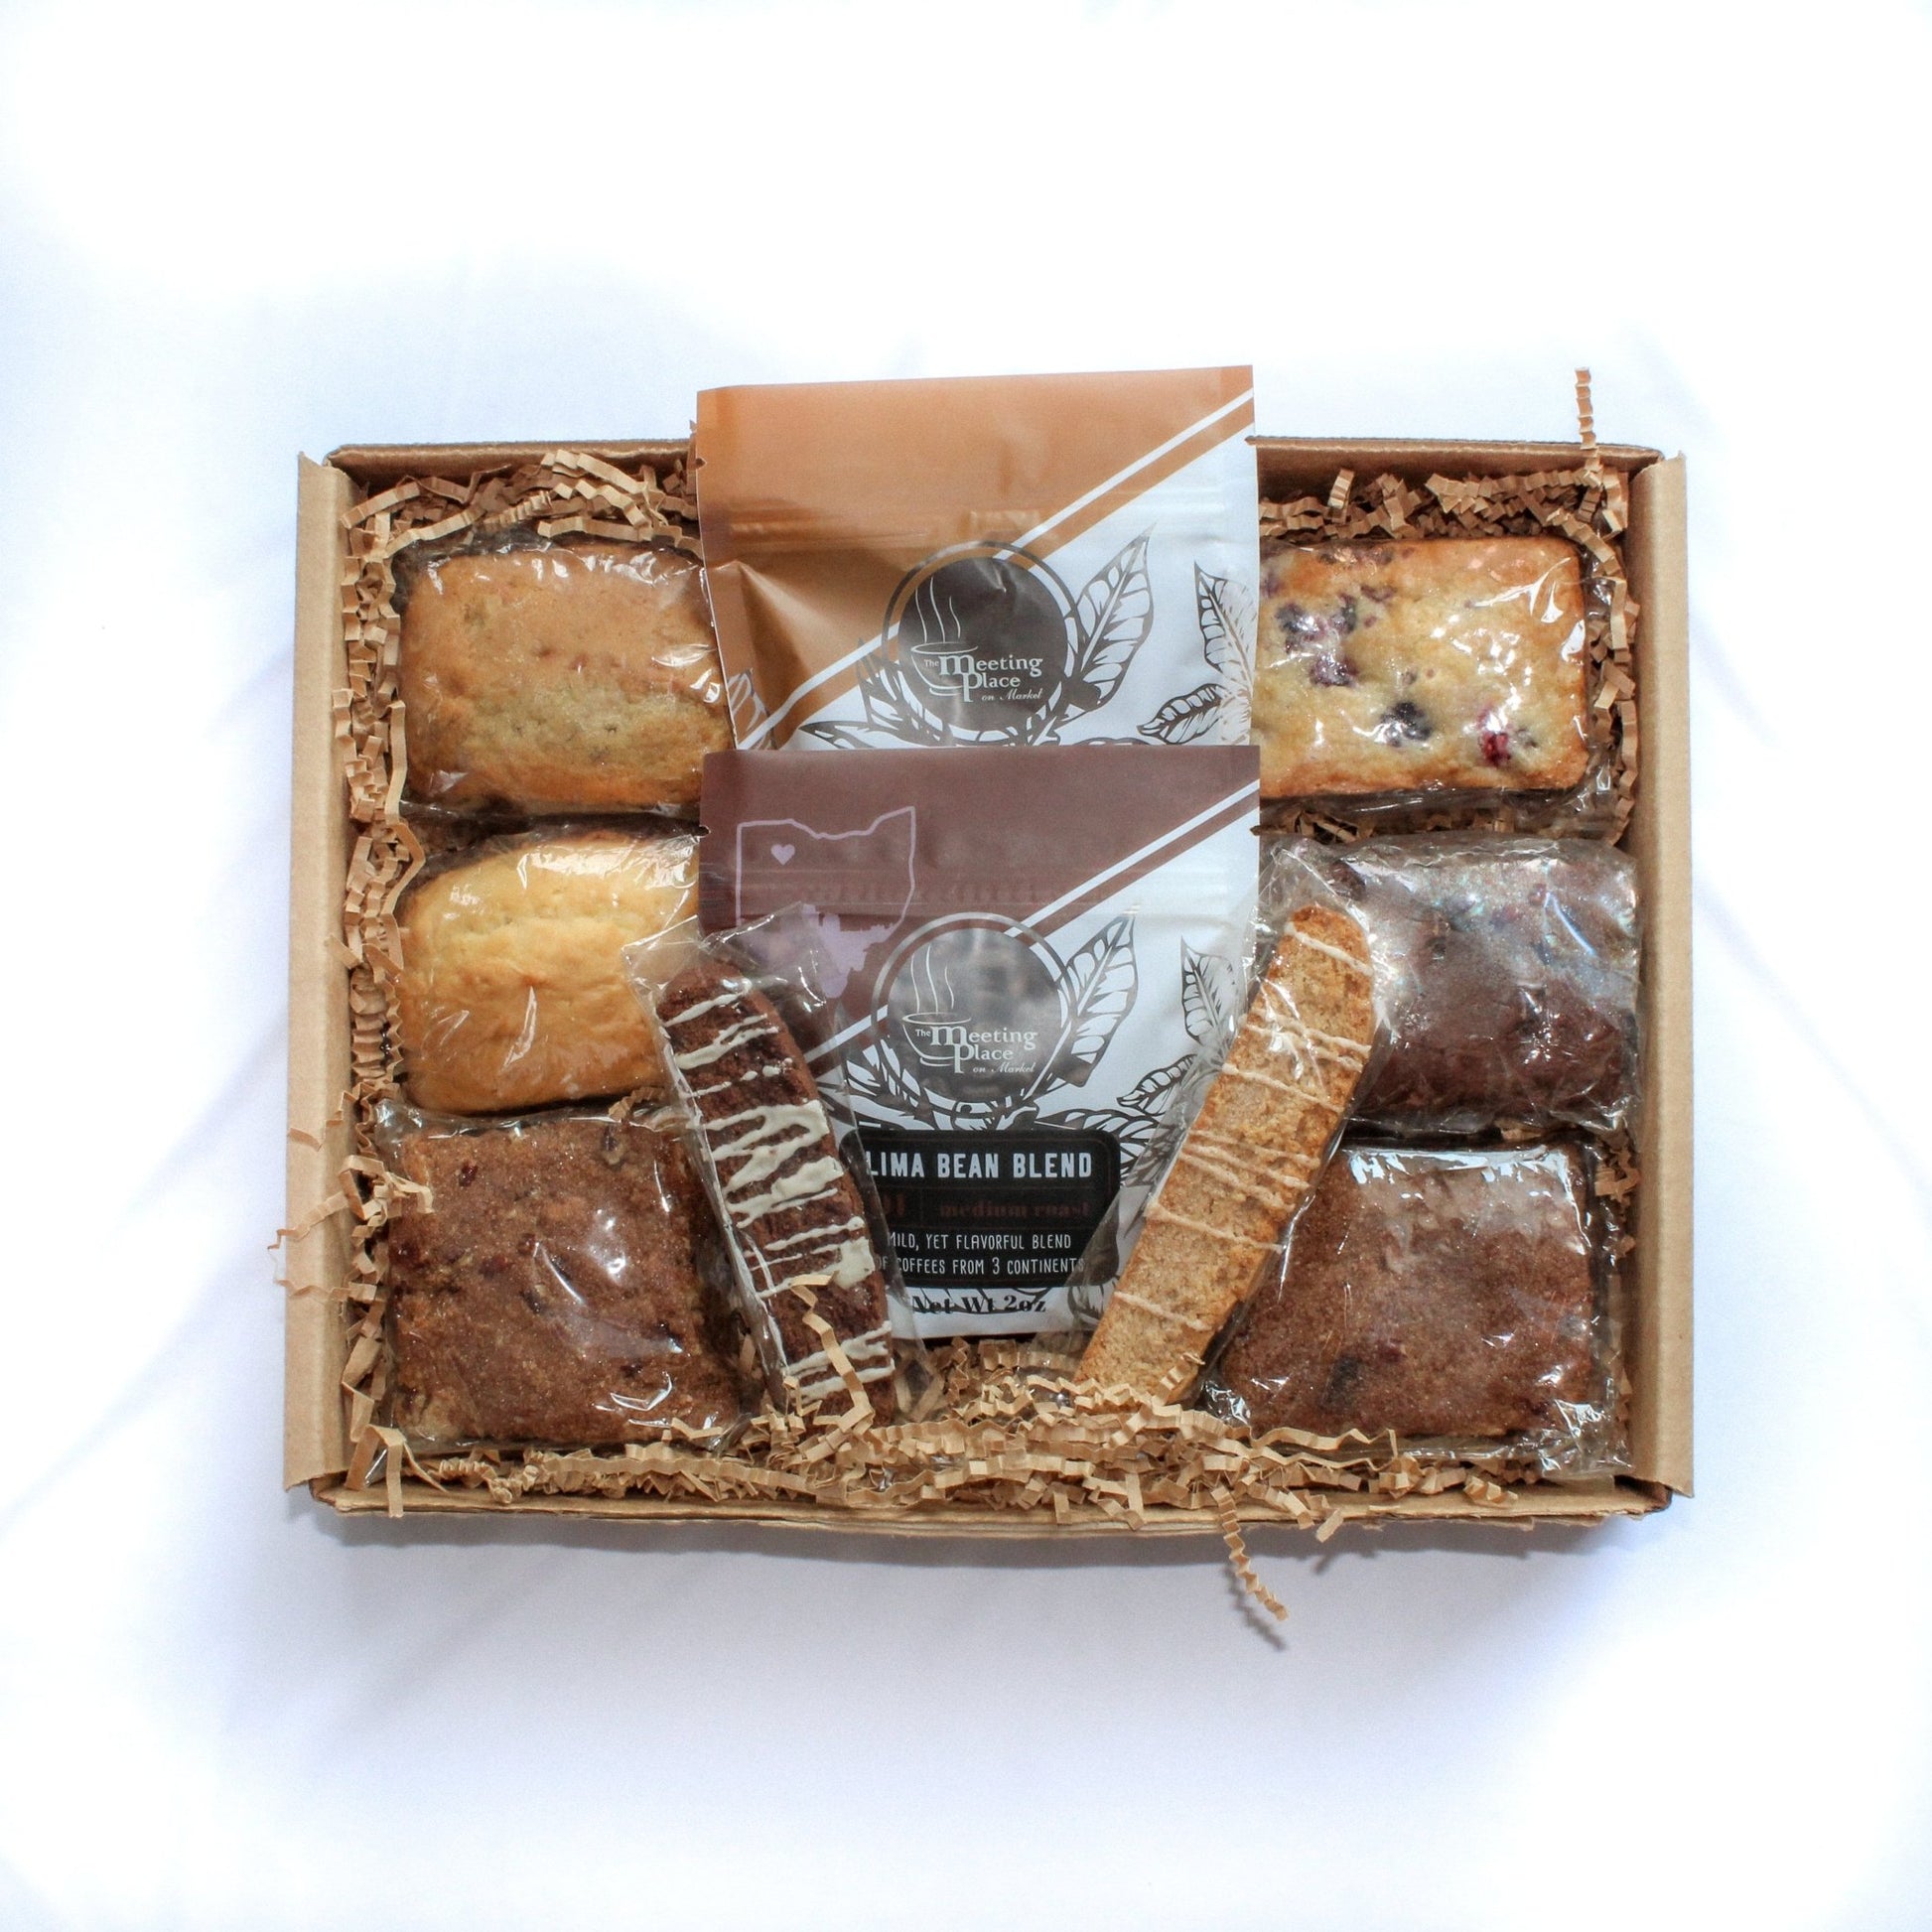 Student Gift Box with Baked Goods & Coffee Graduation Gift Basket - The Meeting Place on Market